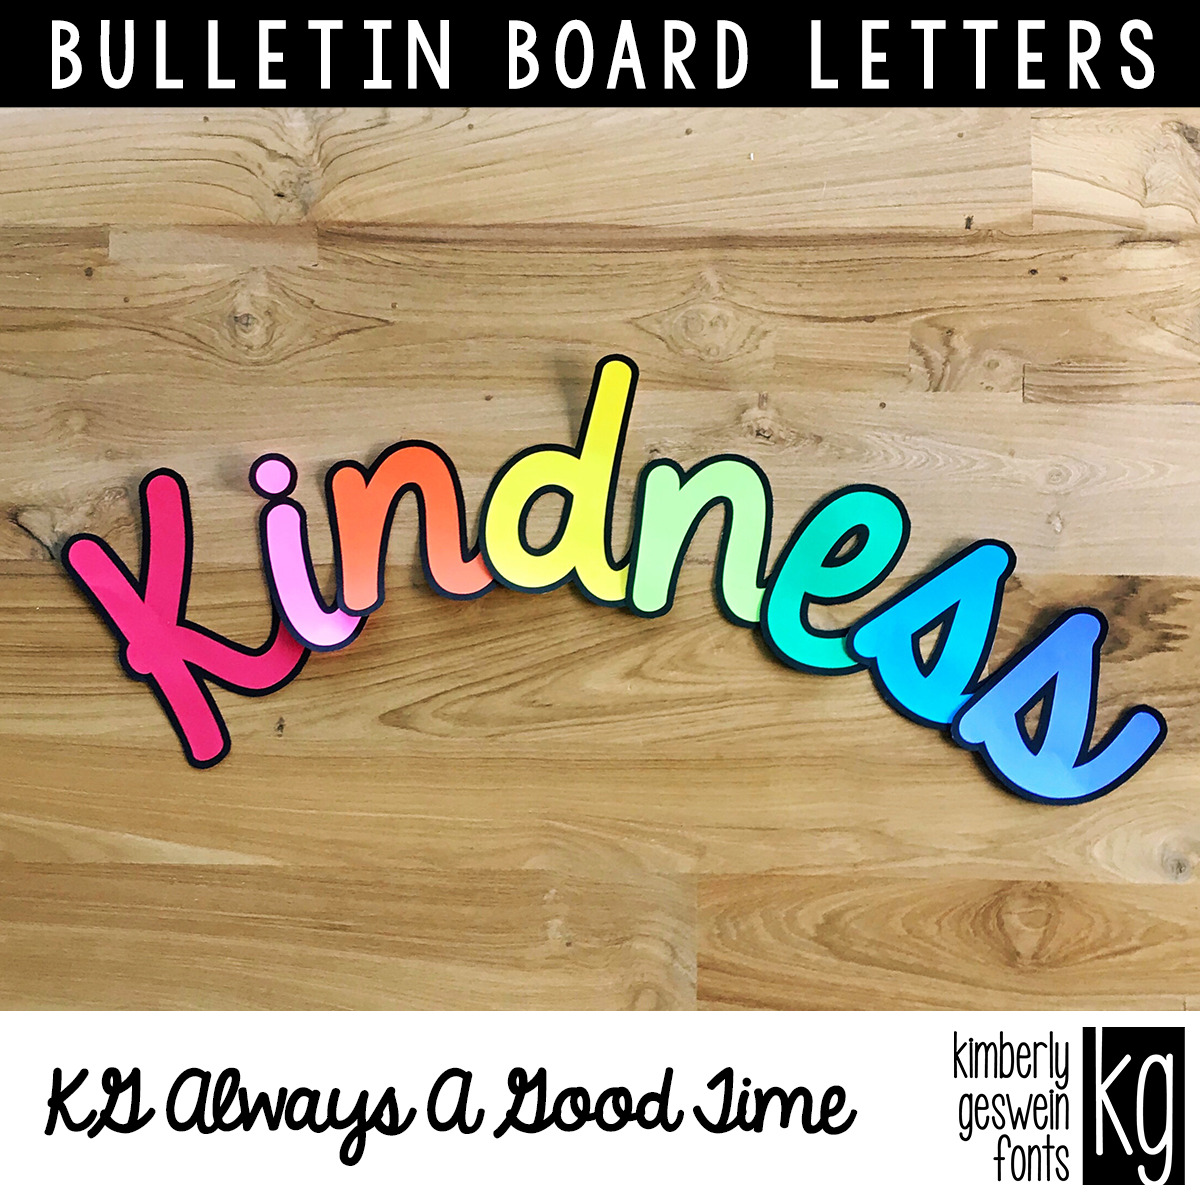 KG Always A Good Time Bulletin Board Letters - Kimberly Geswein Fonts